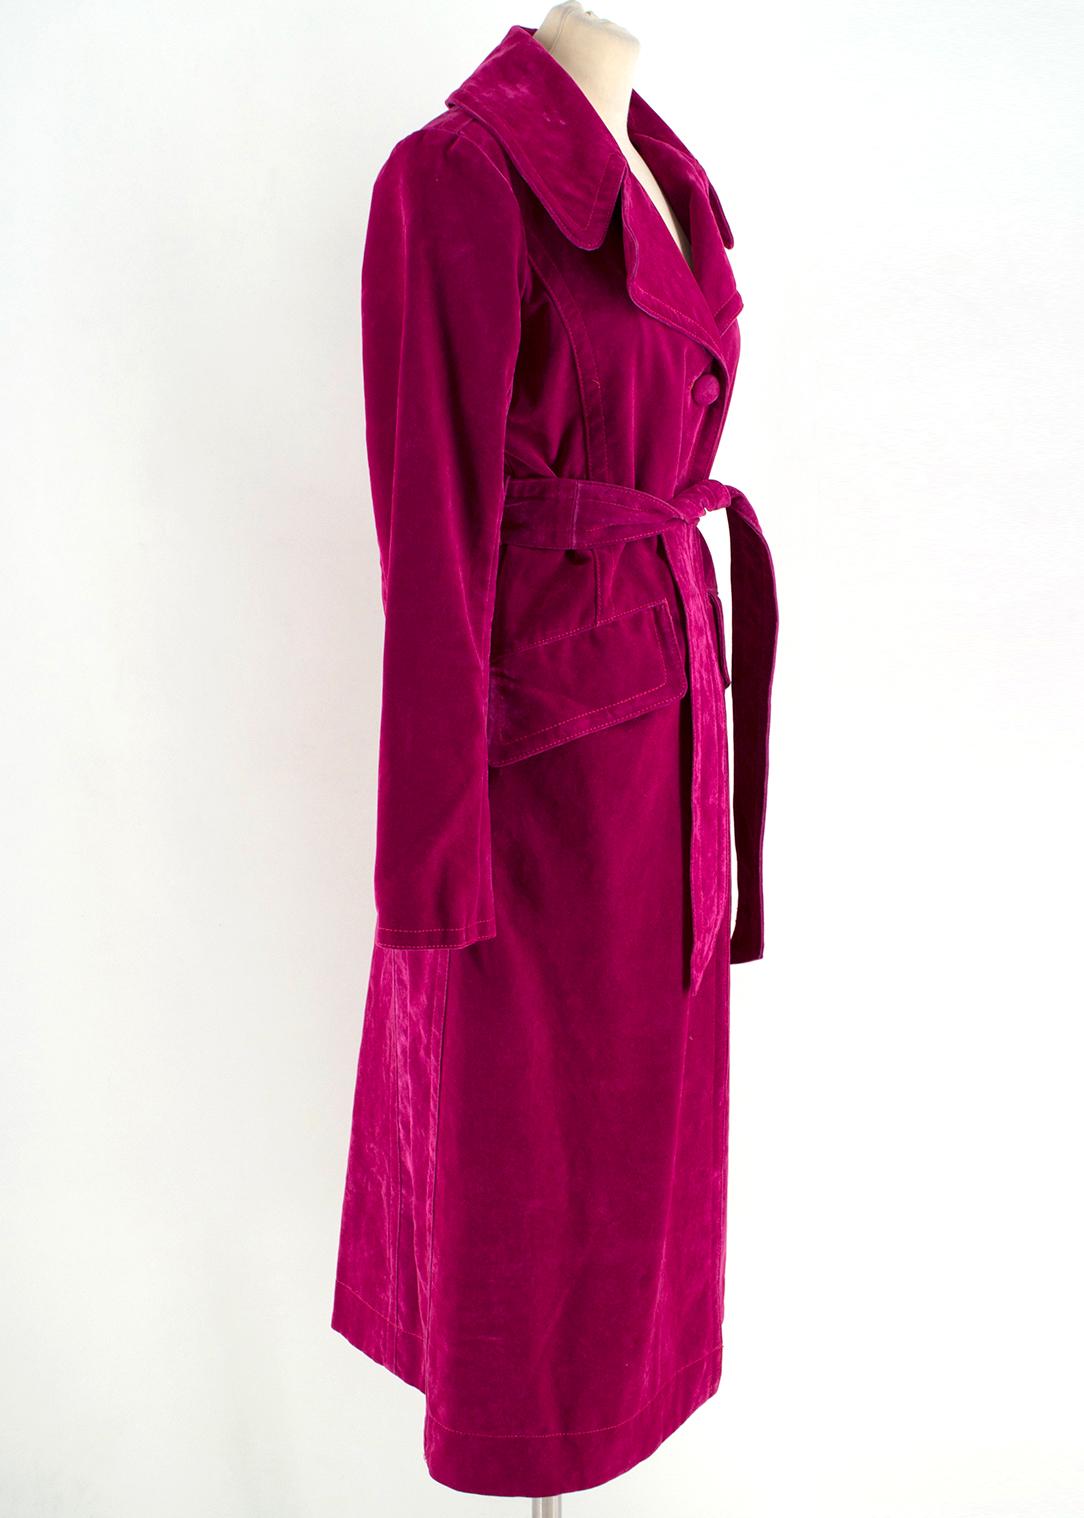 Marc Jacobs Fuchsia Long Velvet Trench Coat

- Fuchsia long velvet trench coat
- Heavy-weight
- Notch lapels
- Centre-front button fastening
- Front flap pockets
- Self-tie belt with belt loops
- Buttoned cuffs
- 69% cotton, 7% viscose and 24%